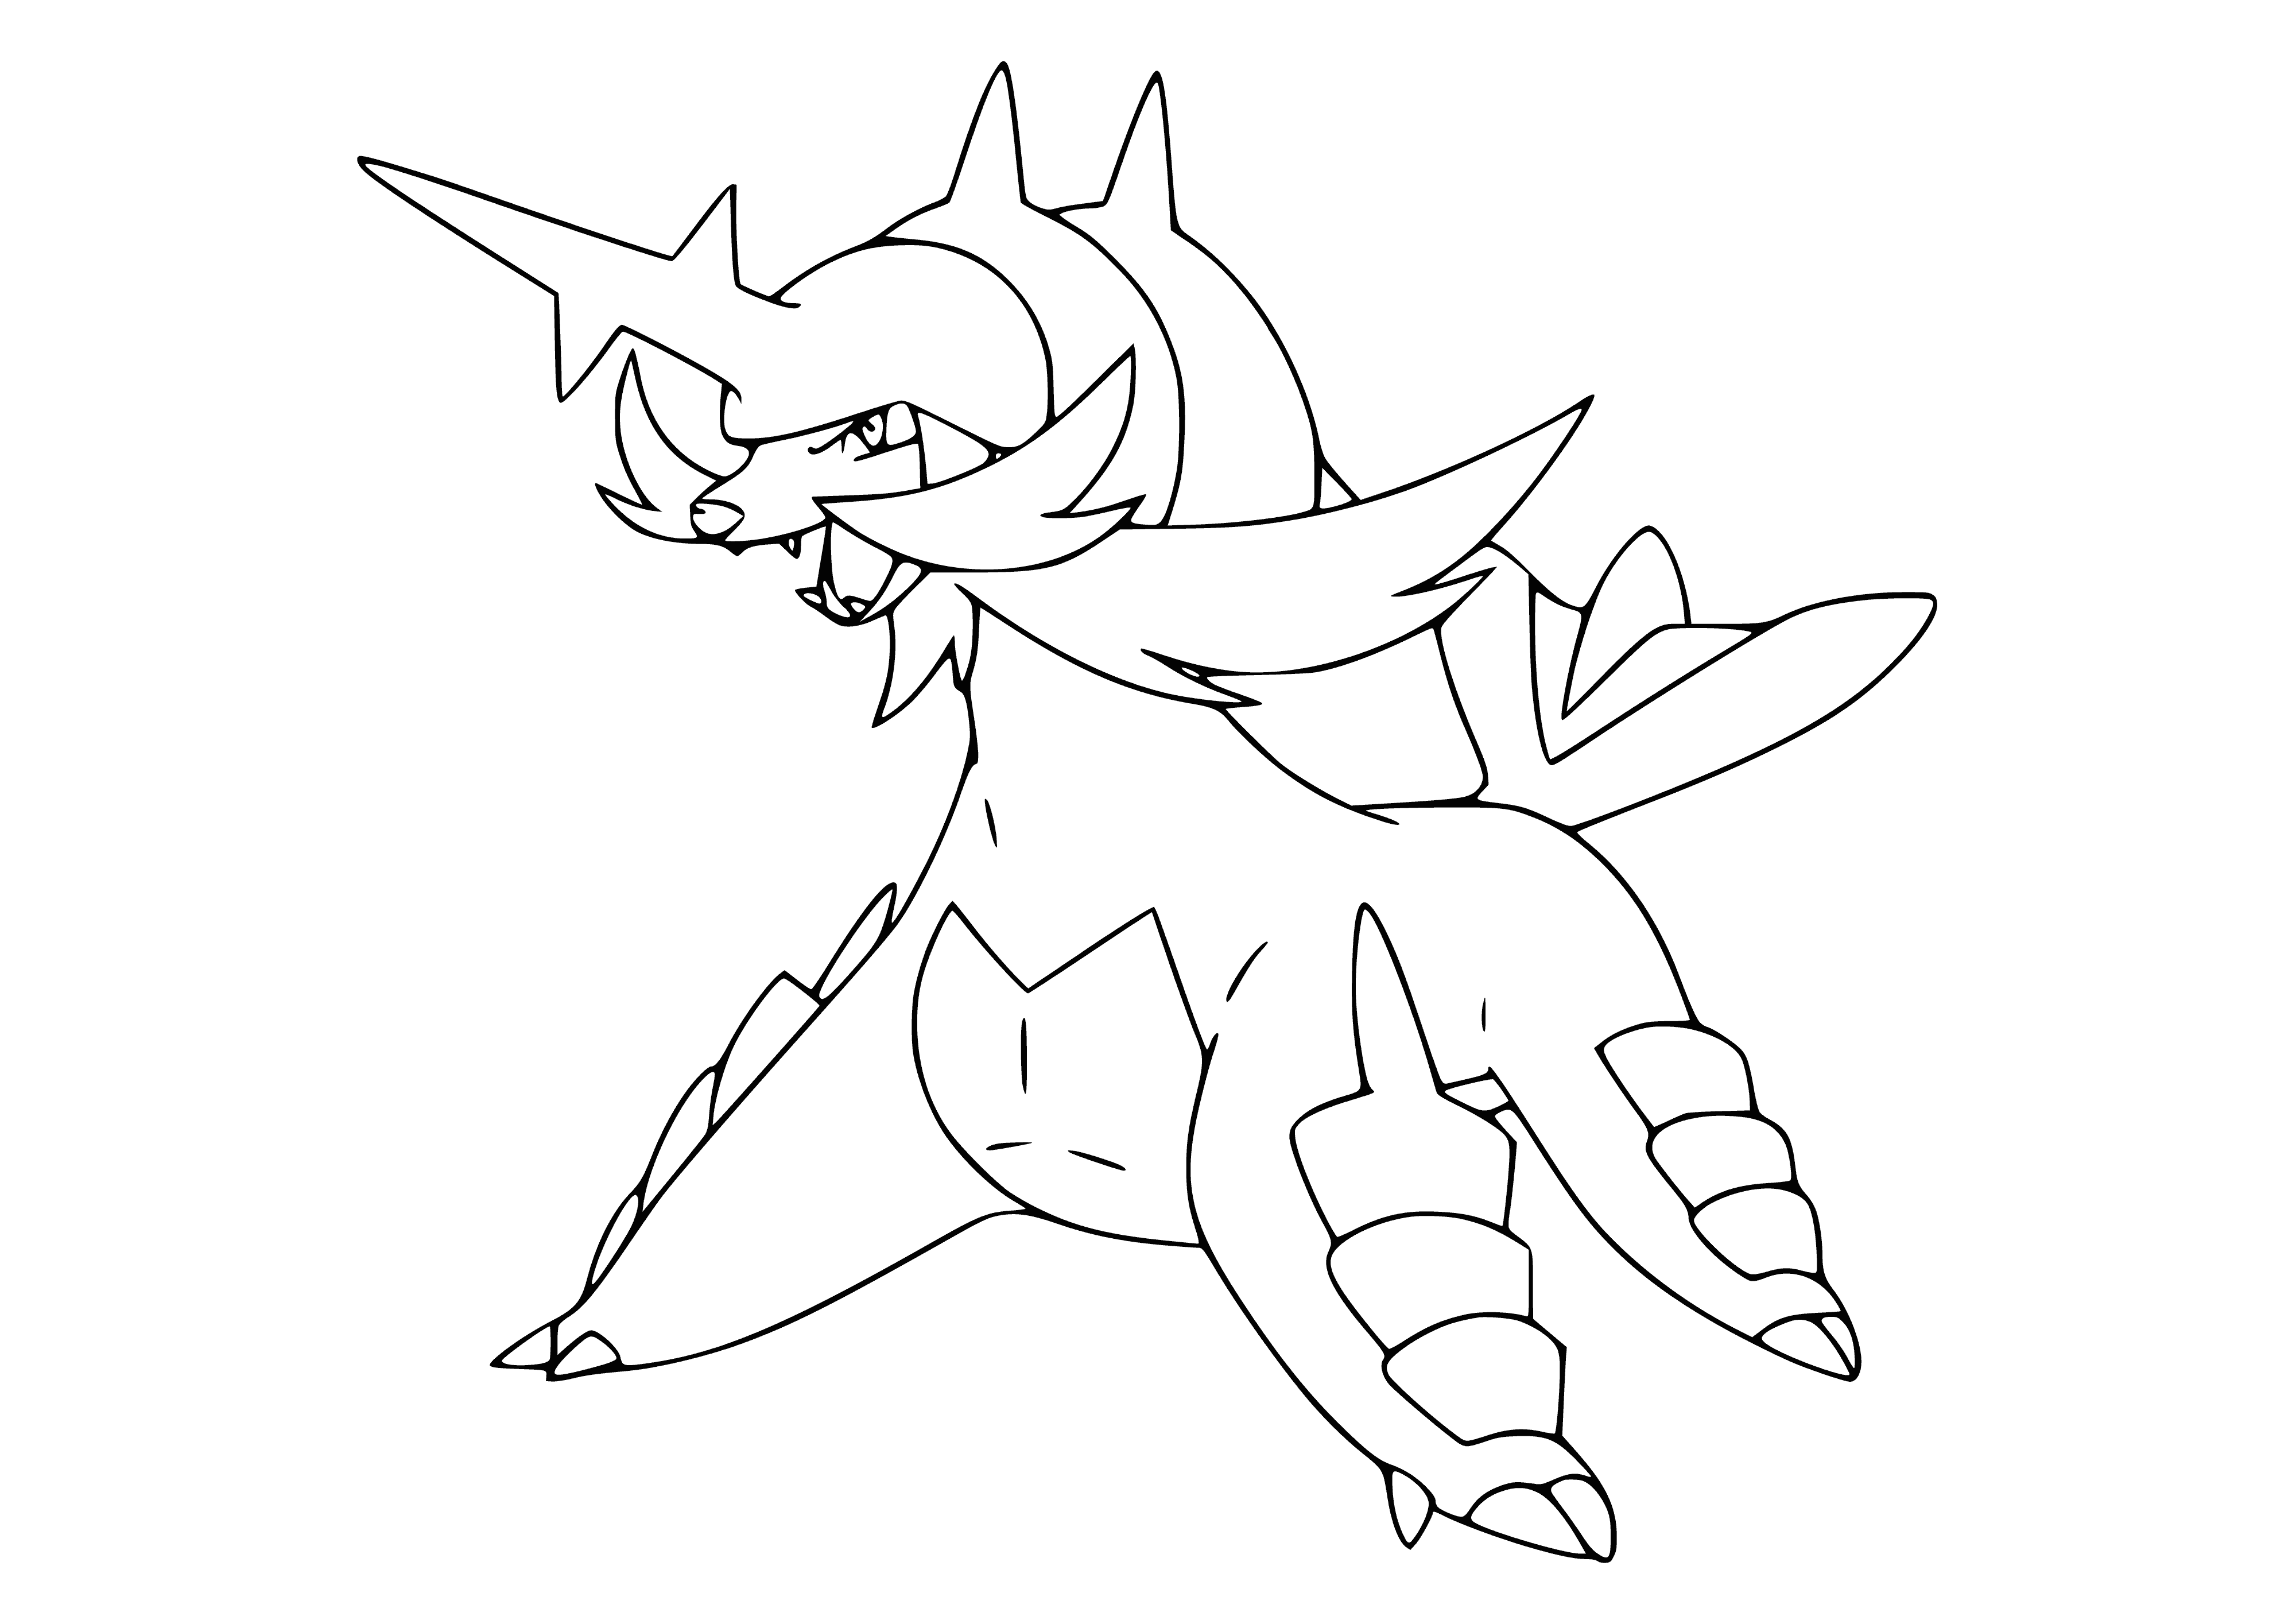 coloring page: Blue, four-legged Pokemon with white tummy fur and horns on its head. Has two large swords on back. Sharp black beak.